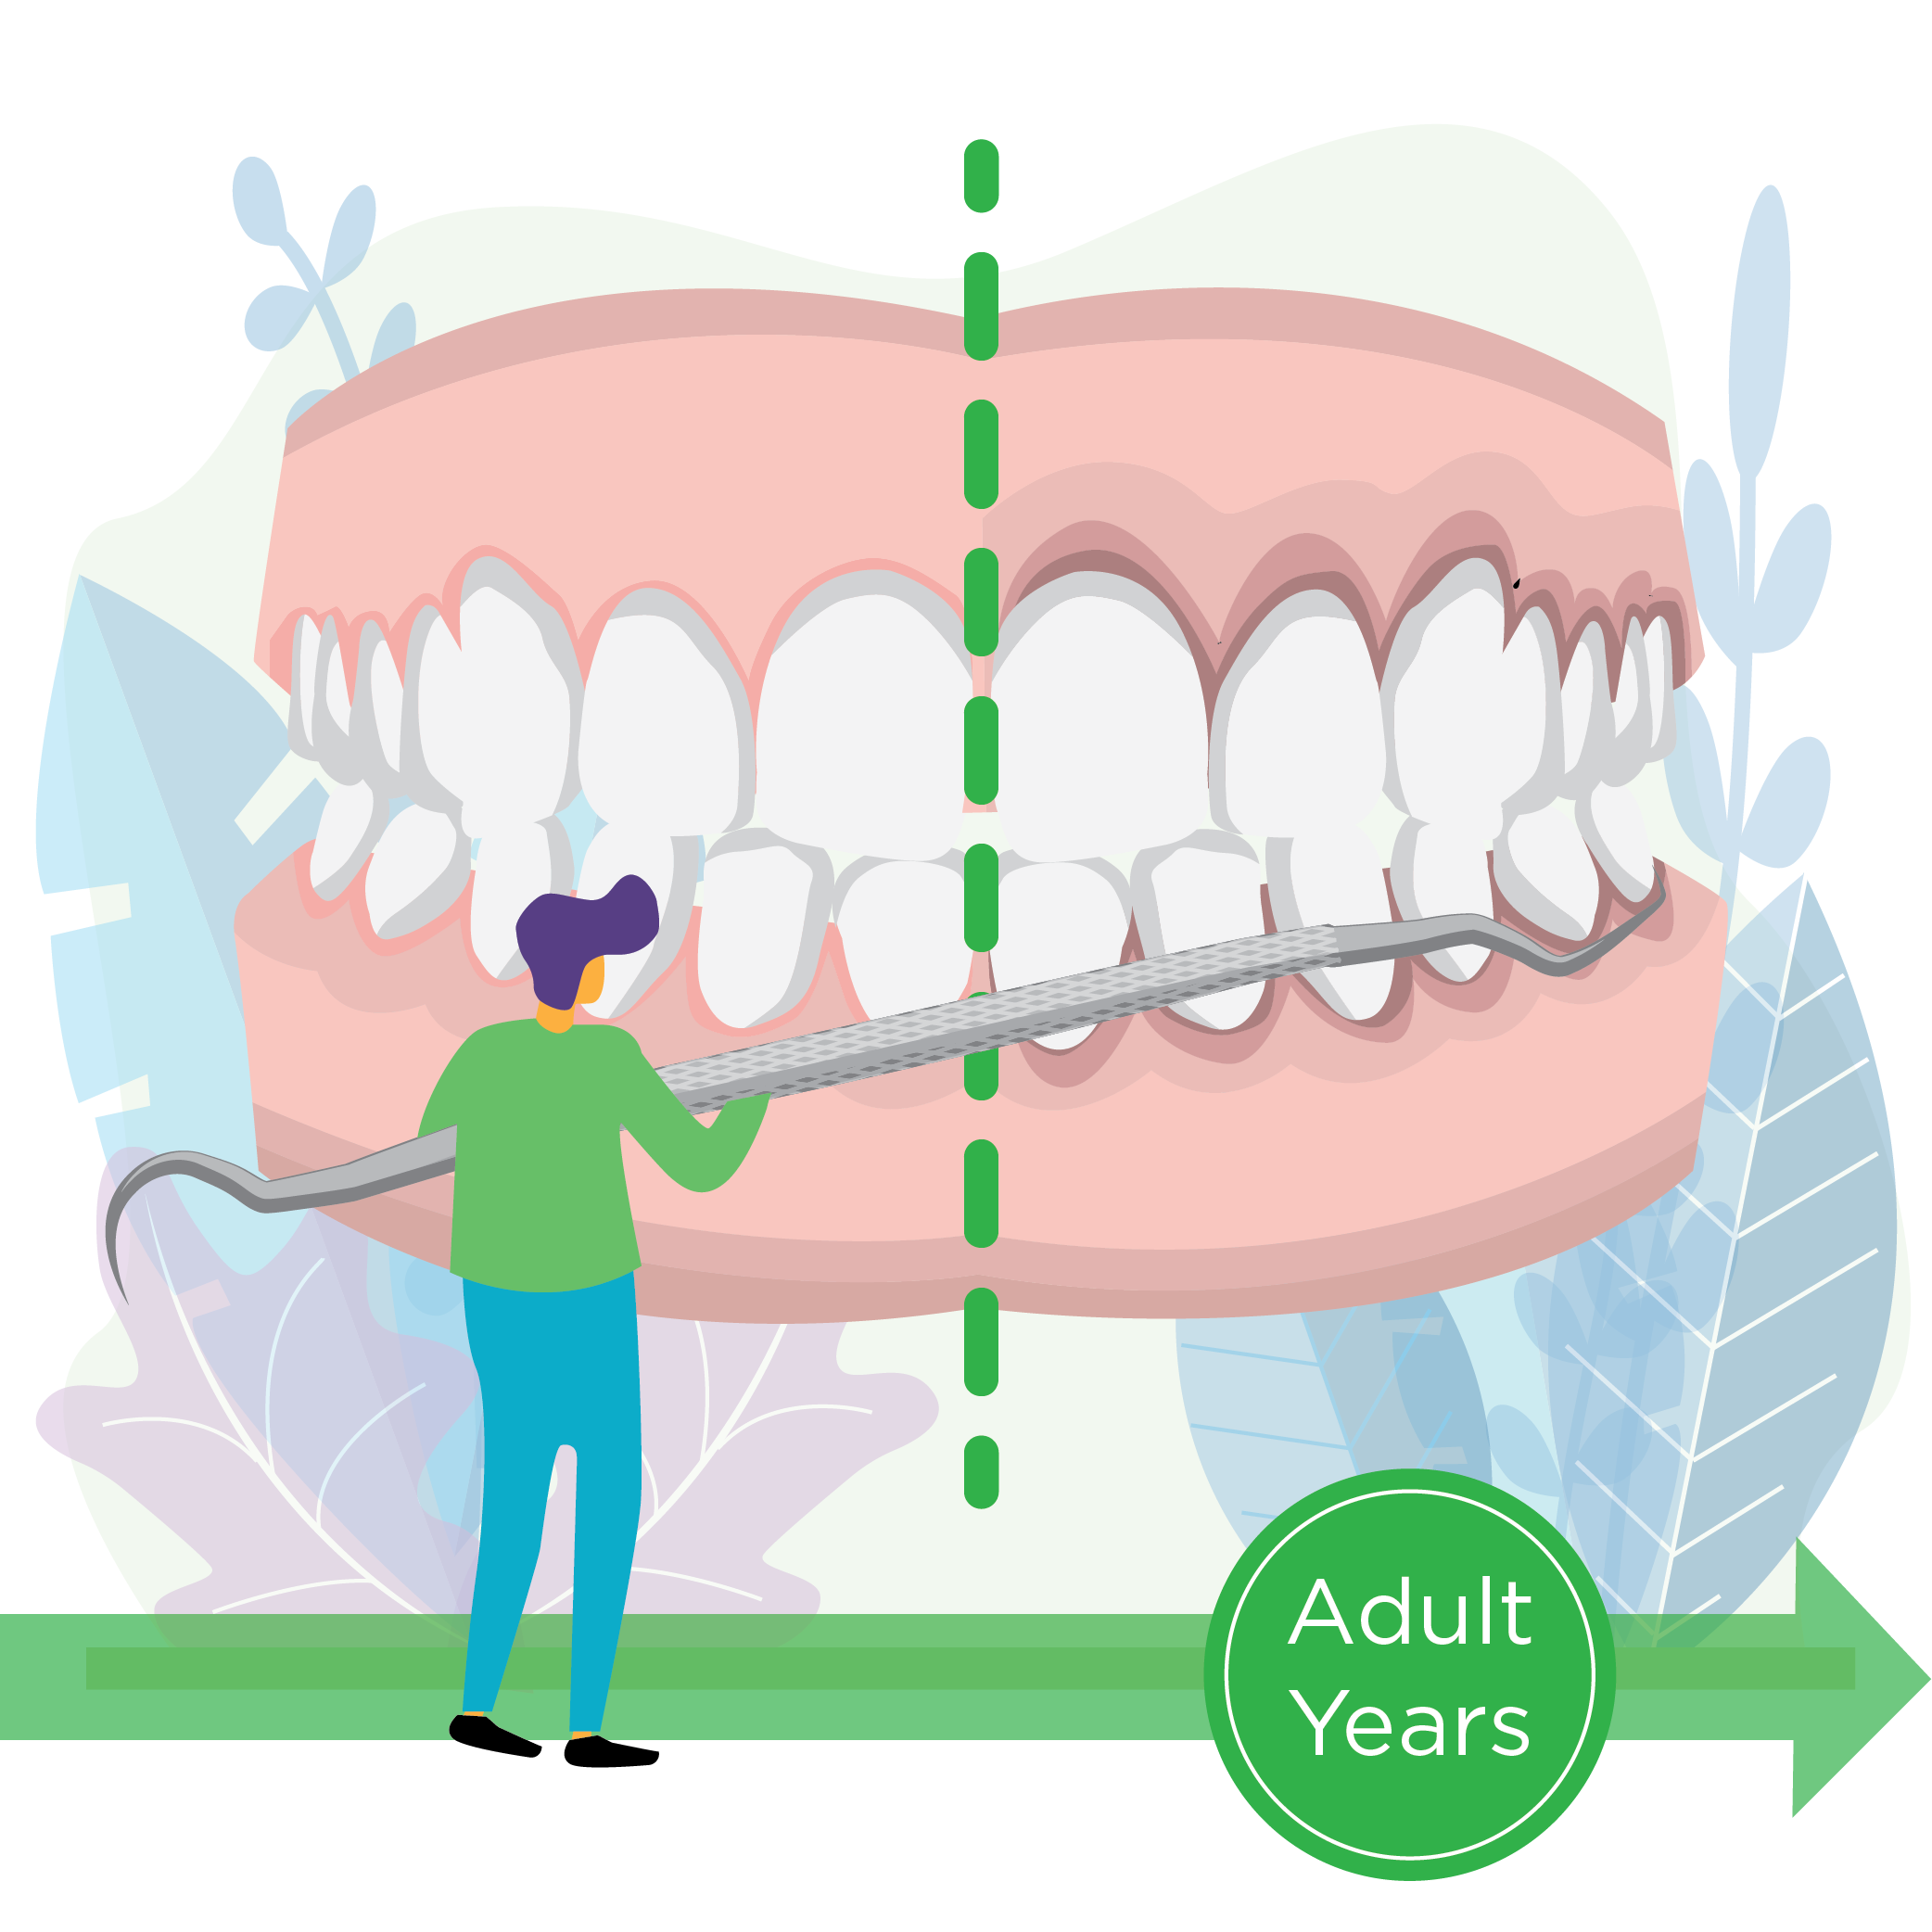 Illustration of a small figure standing in front of a large jaw with teeth and gums using a dental tool to clean the teeth. A banner across the bottom says, "Adult Years"